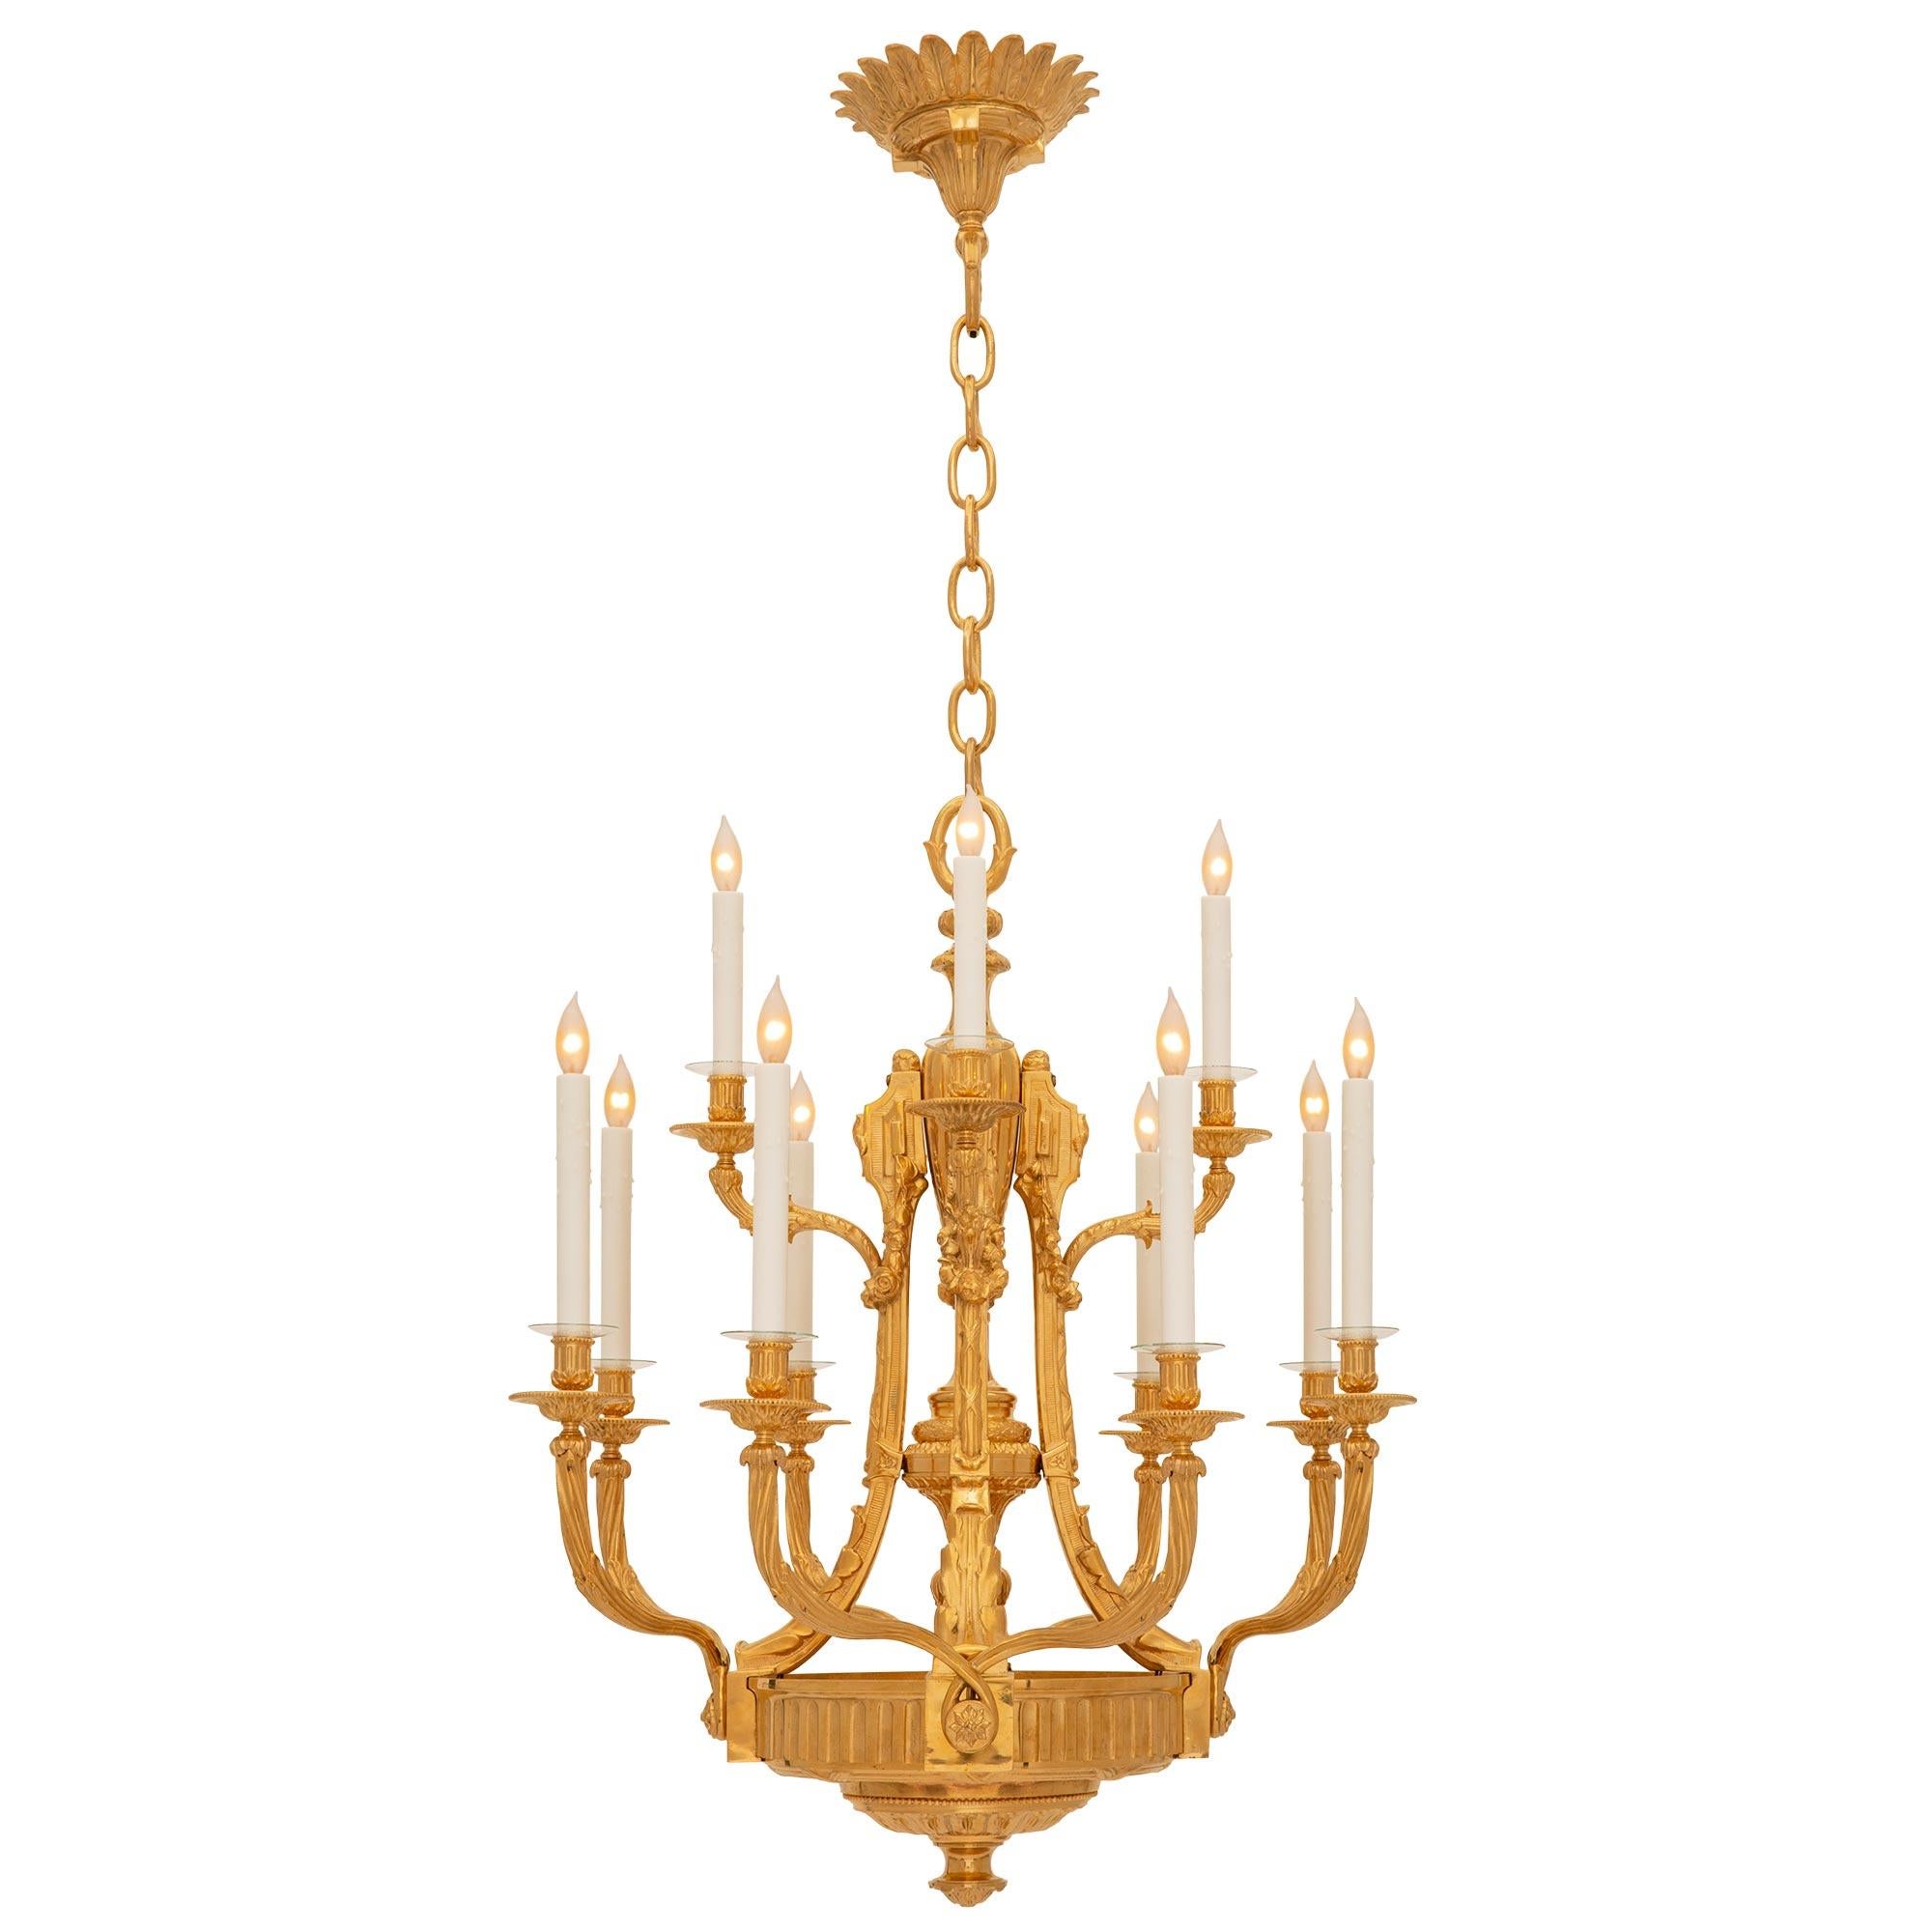 A striking French 19th century Louis XVI st. ormolu chandelier. The twelve arm two tiered chandelier is centered by a fine mottled foliate bottom finial below beautiful berried laurel leaves below beaded and tied fluted wrap around bands. The